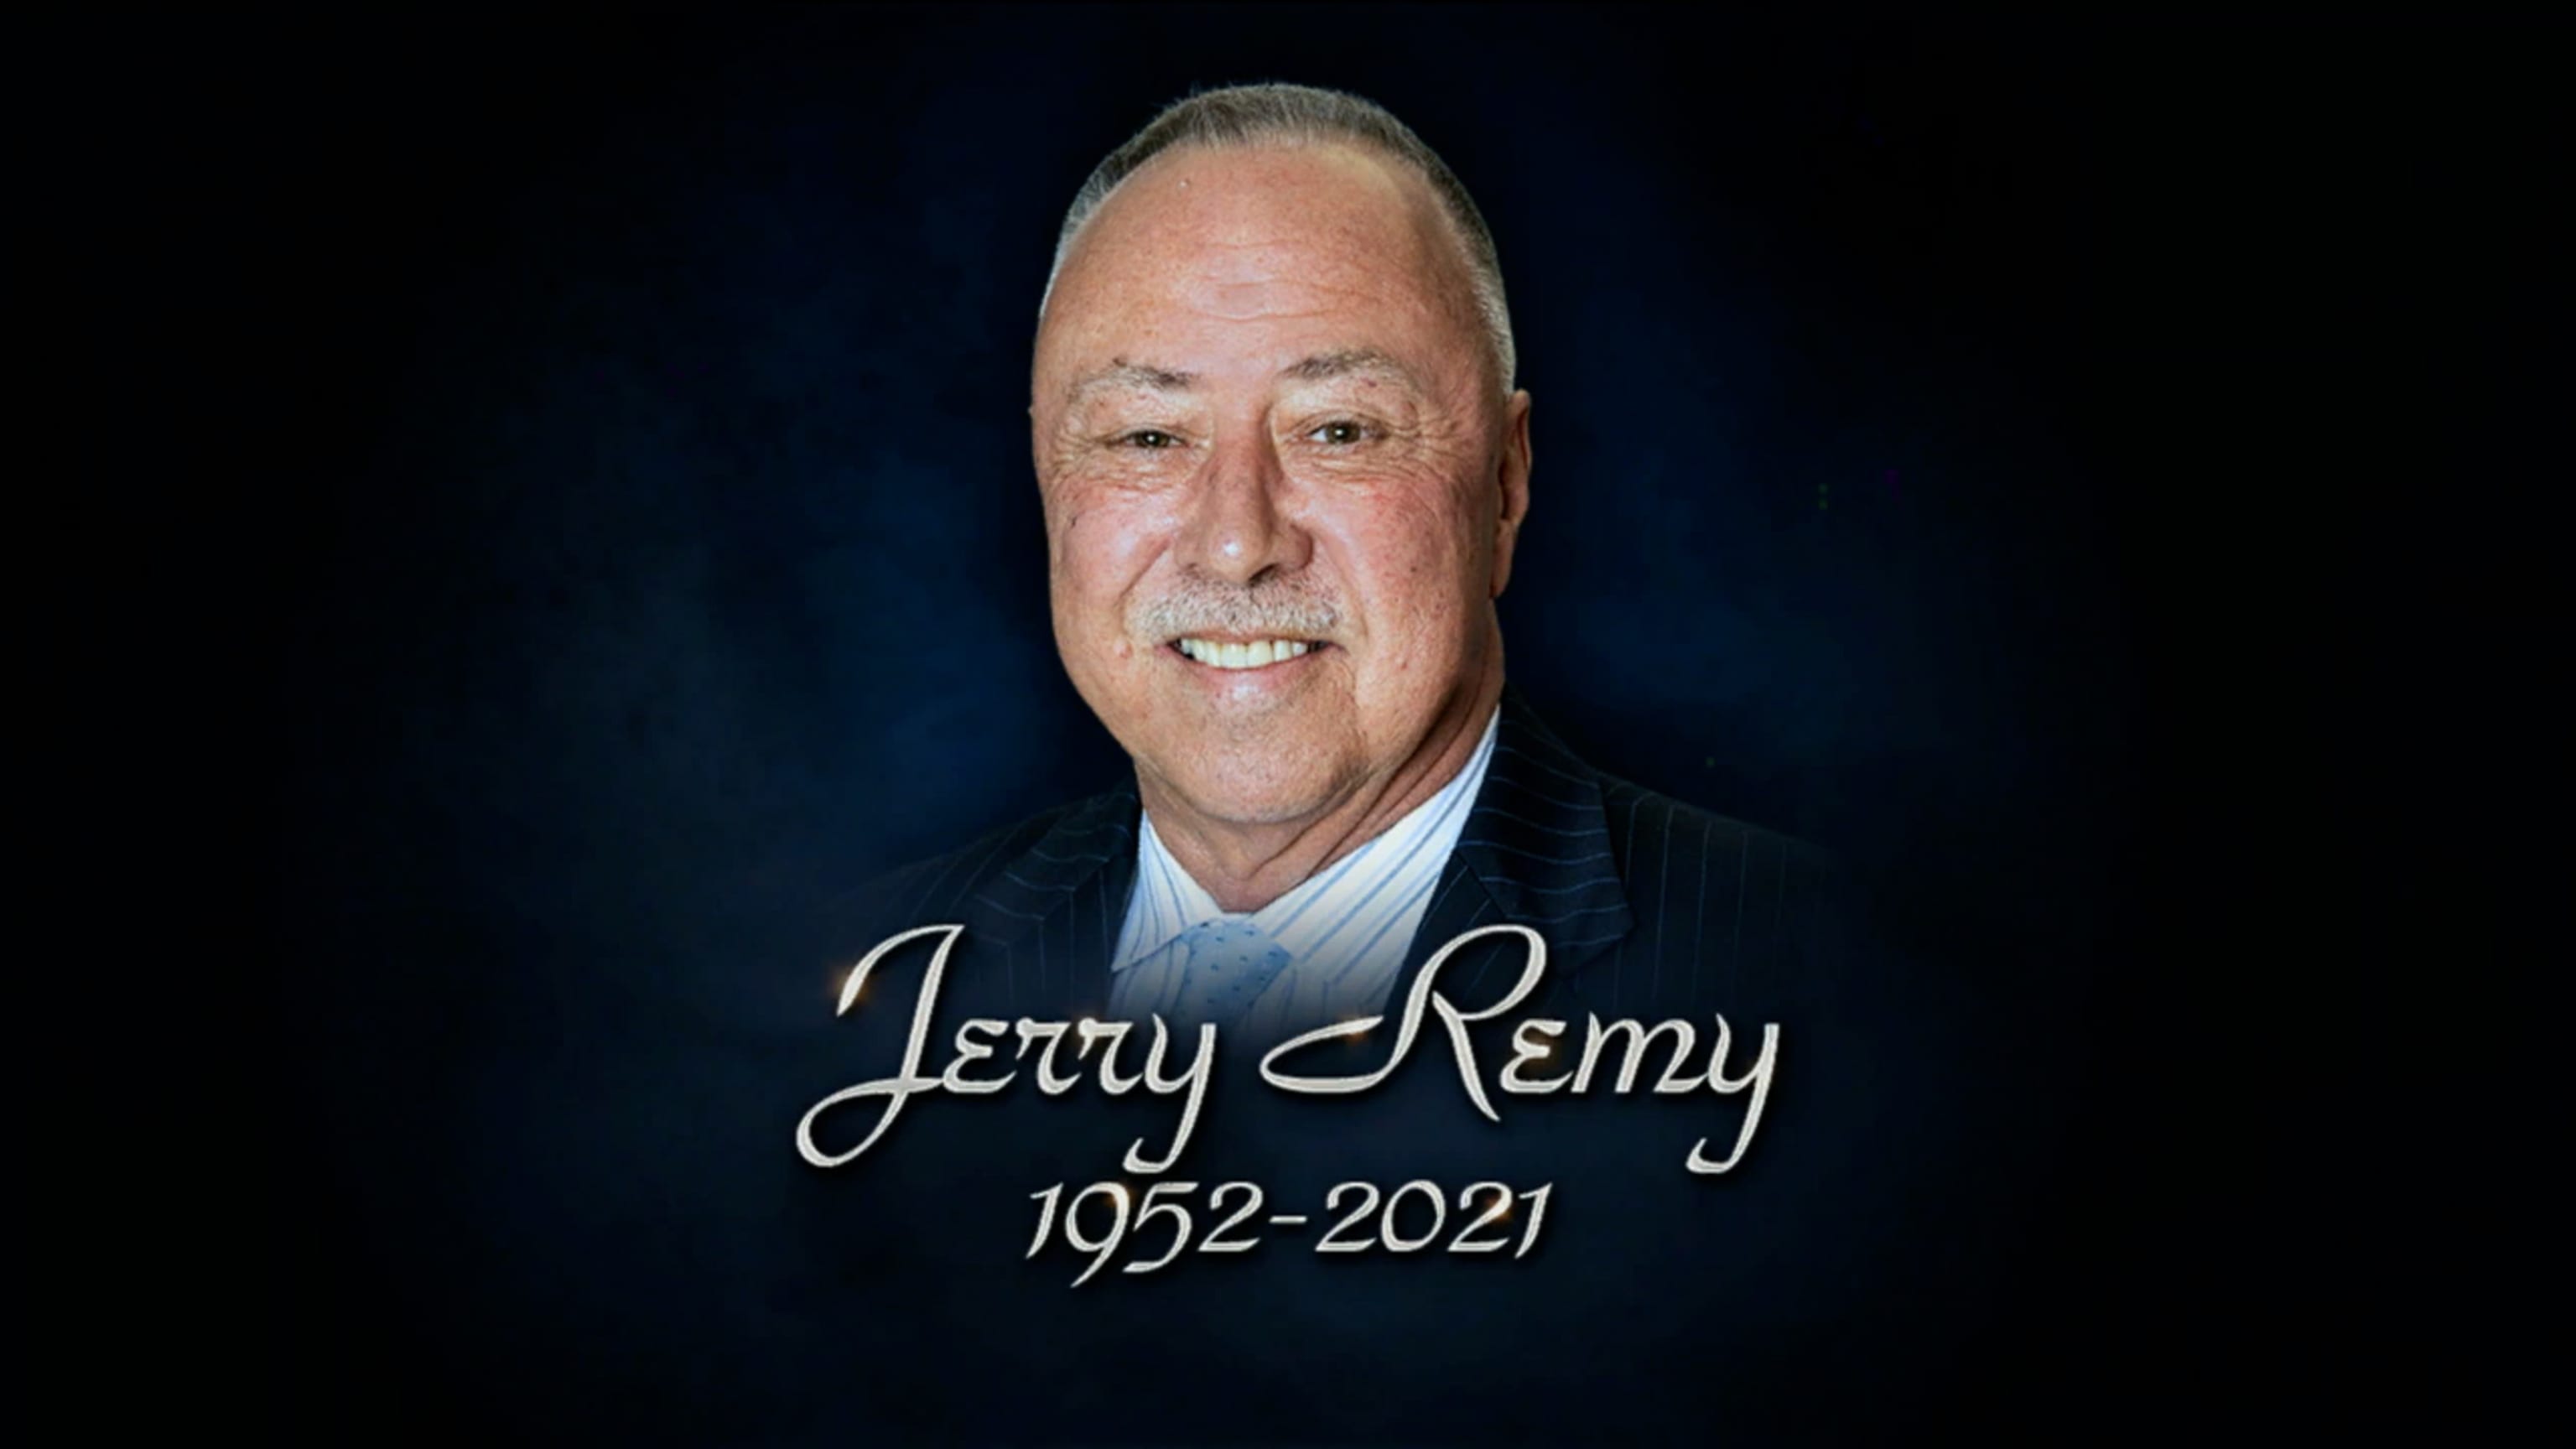 Jerry Remy obituary: Red Sox All-Star dies at 68 –